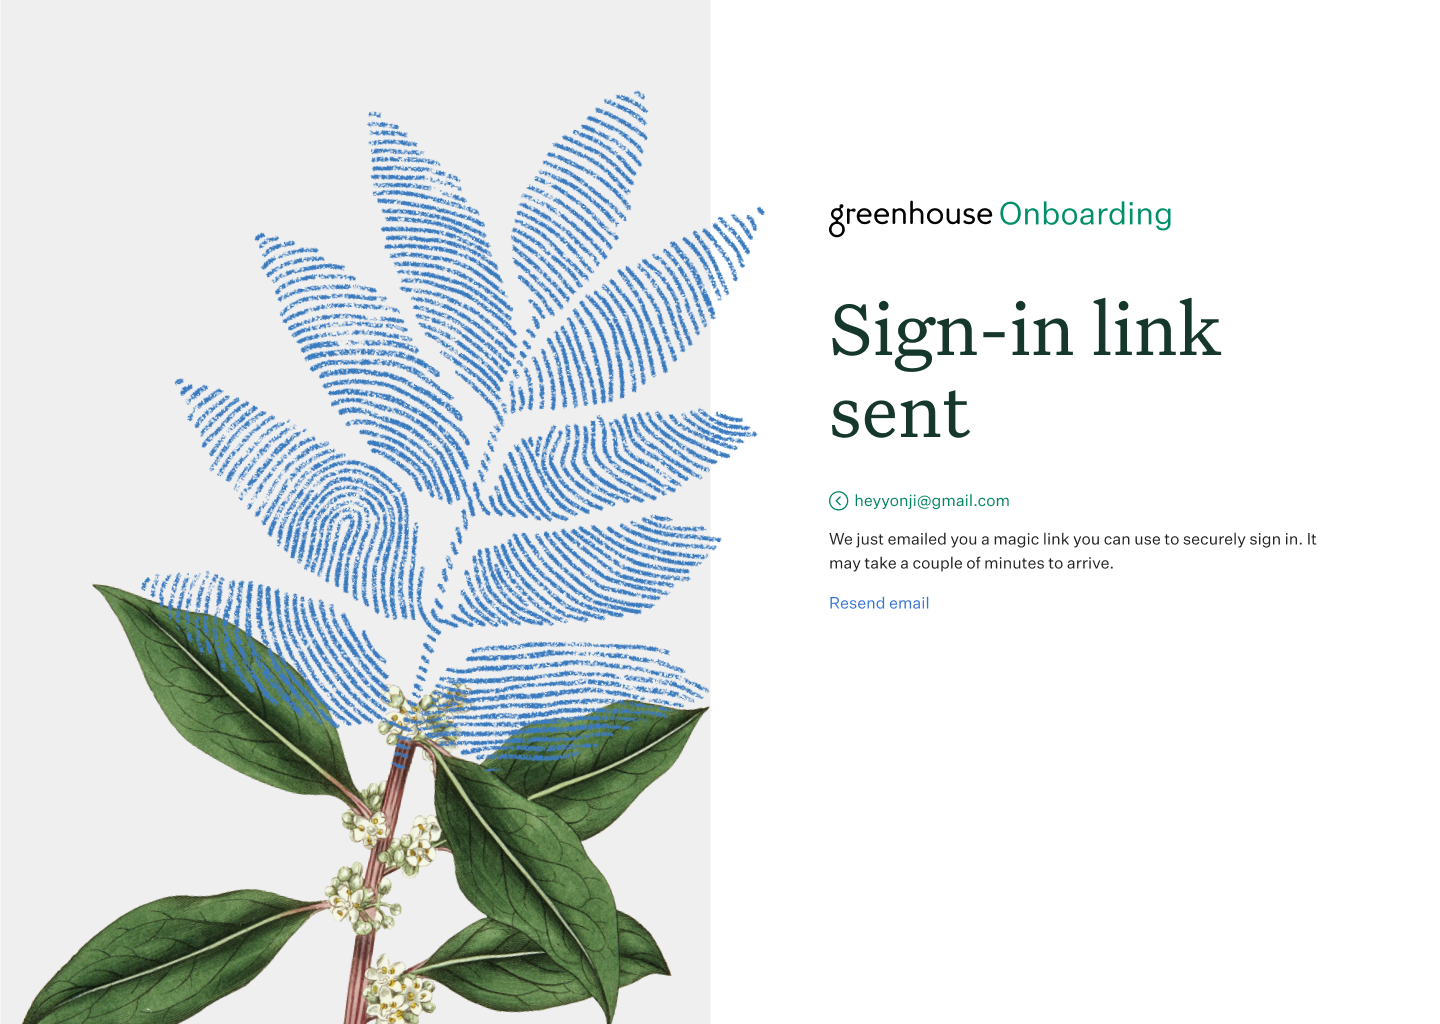 Greenhouse Onboarding login confirmation page with notice that a link has been sent